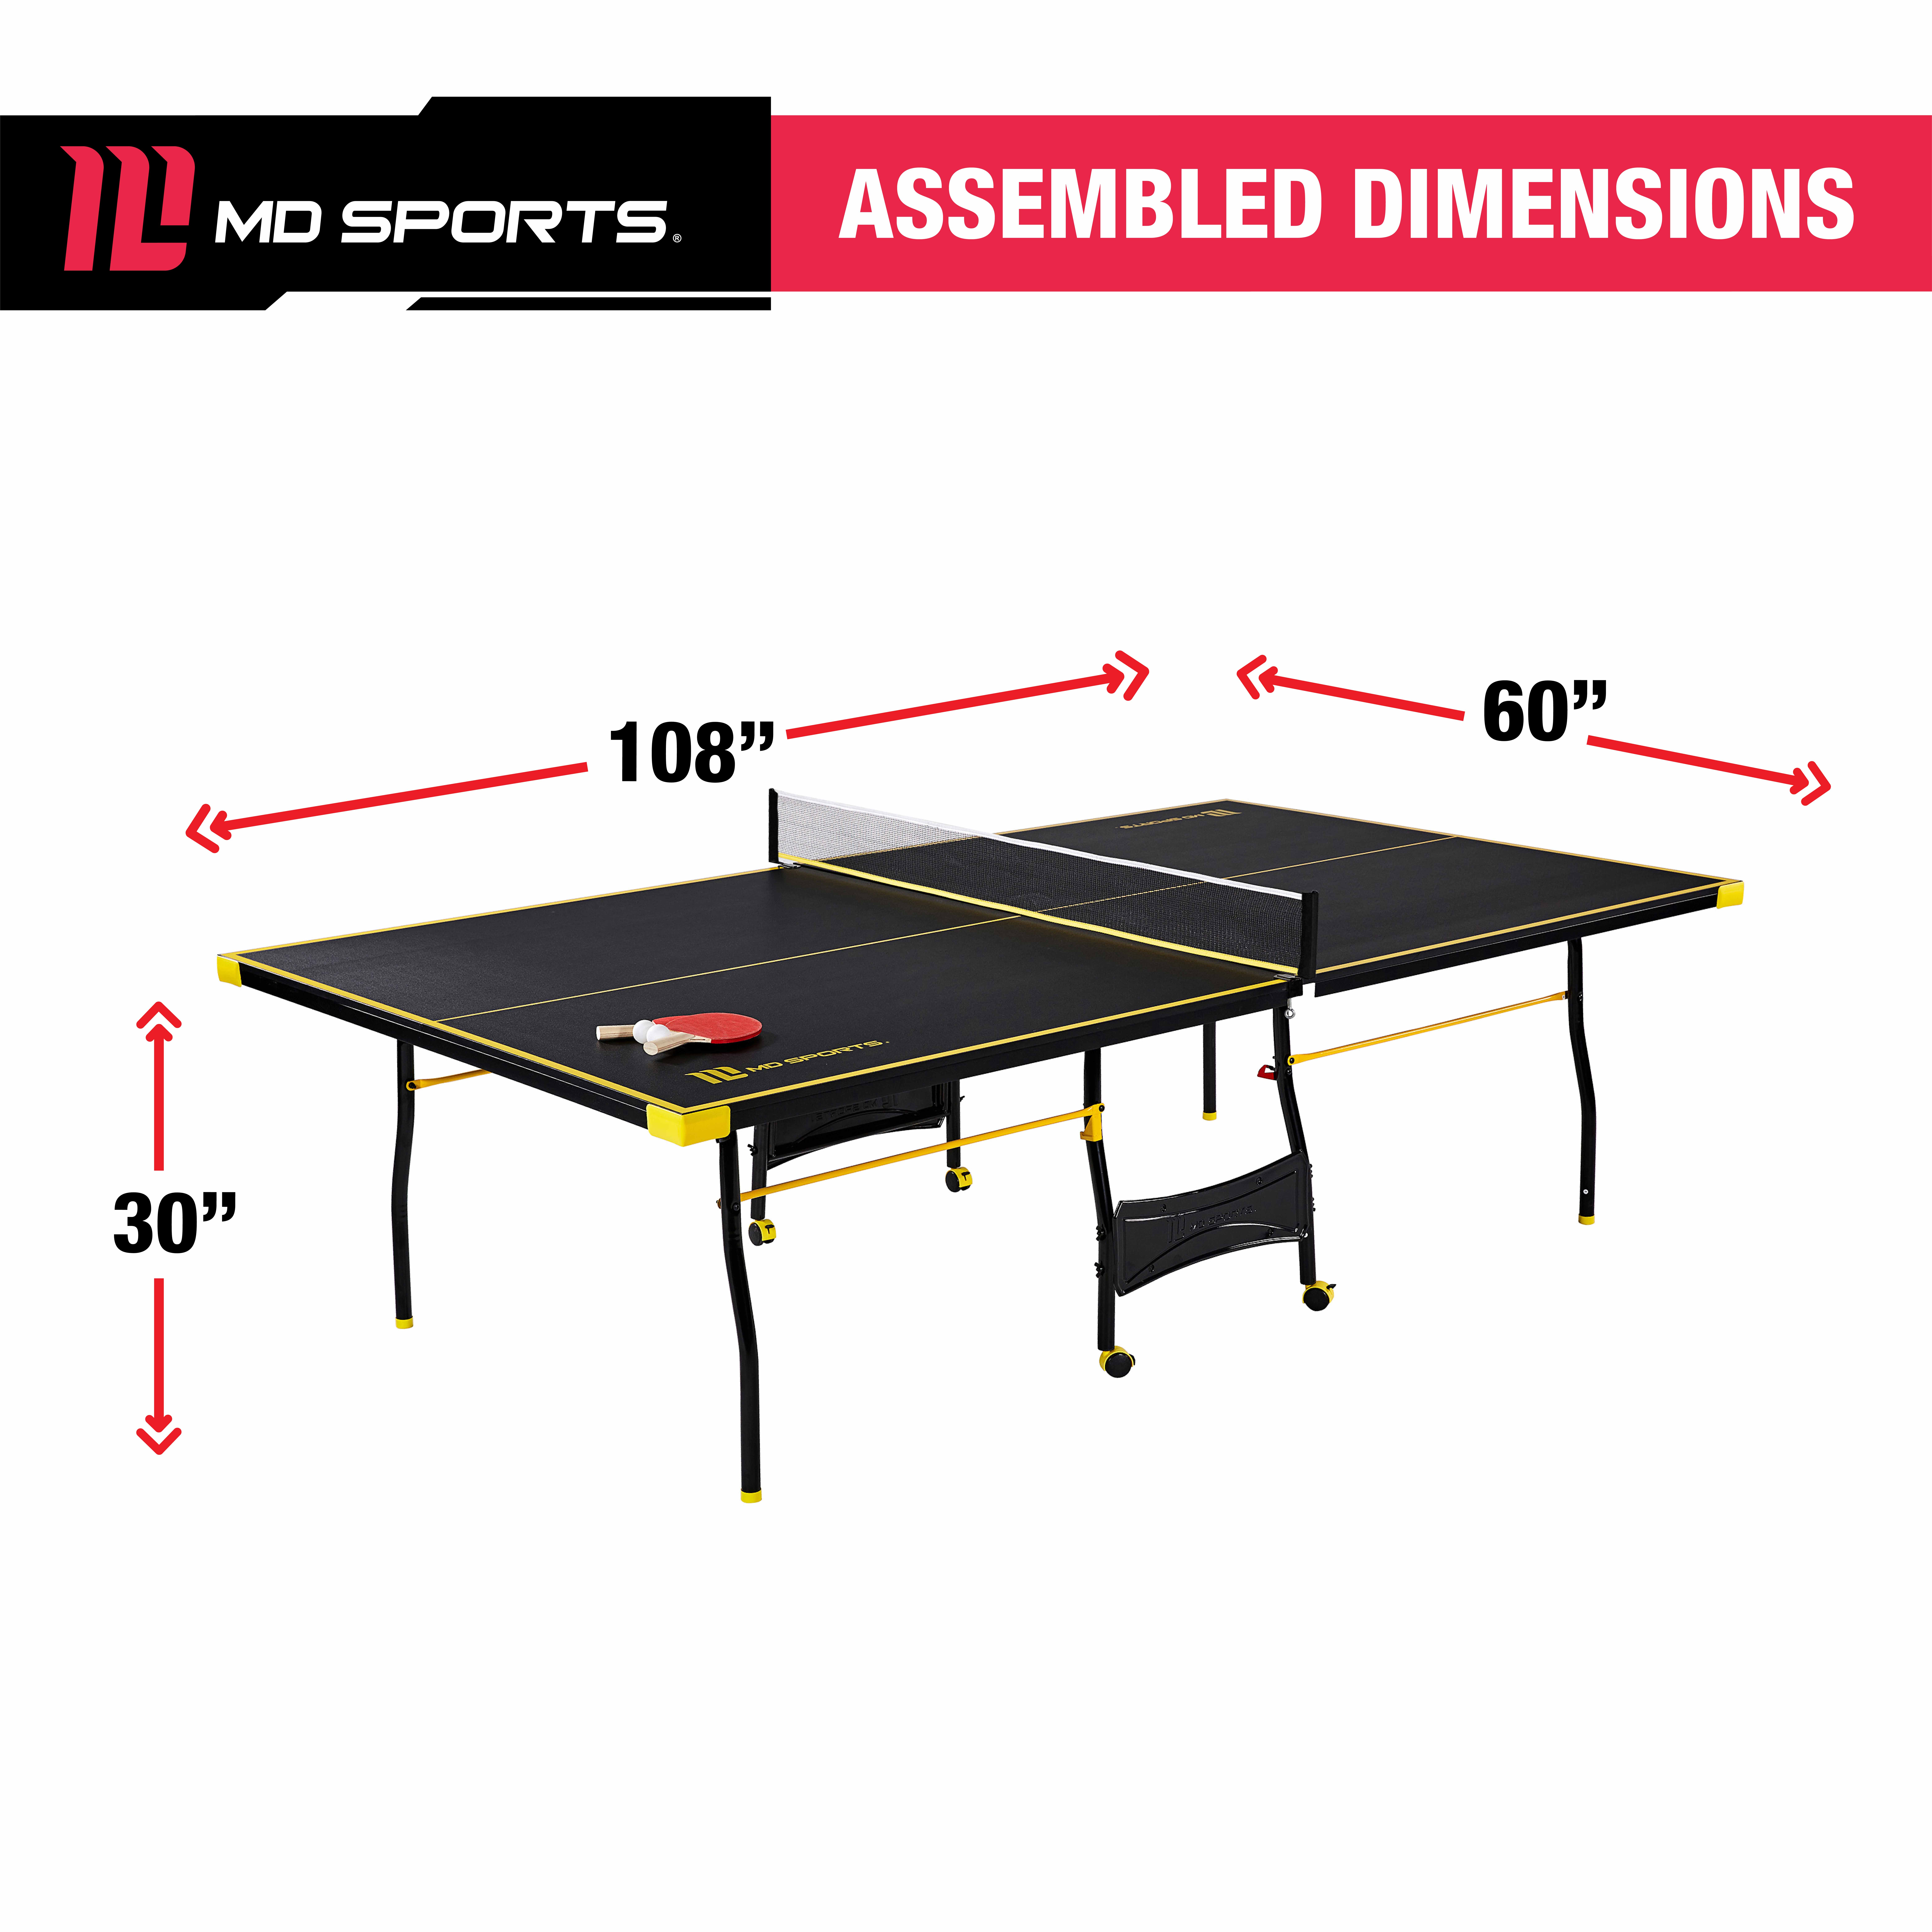 MD Sports Official Size Table Tennis Table - image 9 of 13